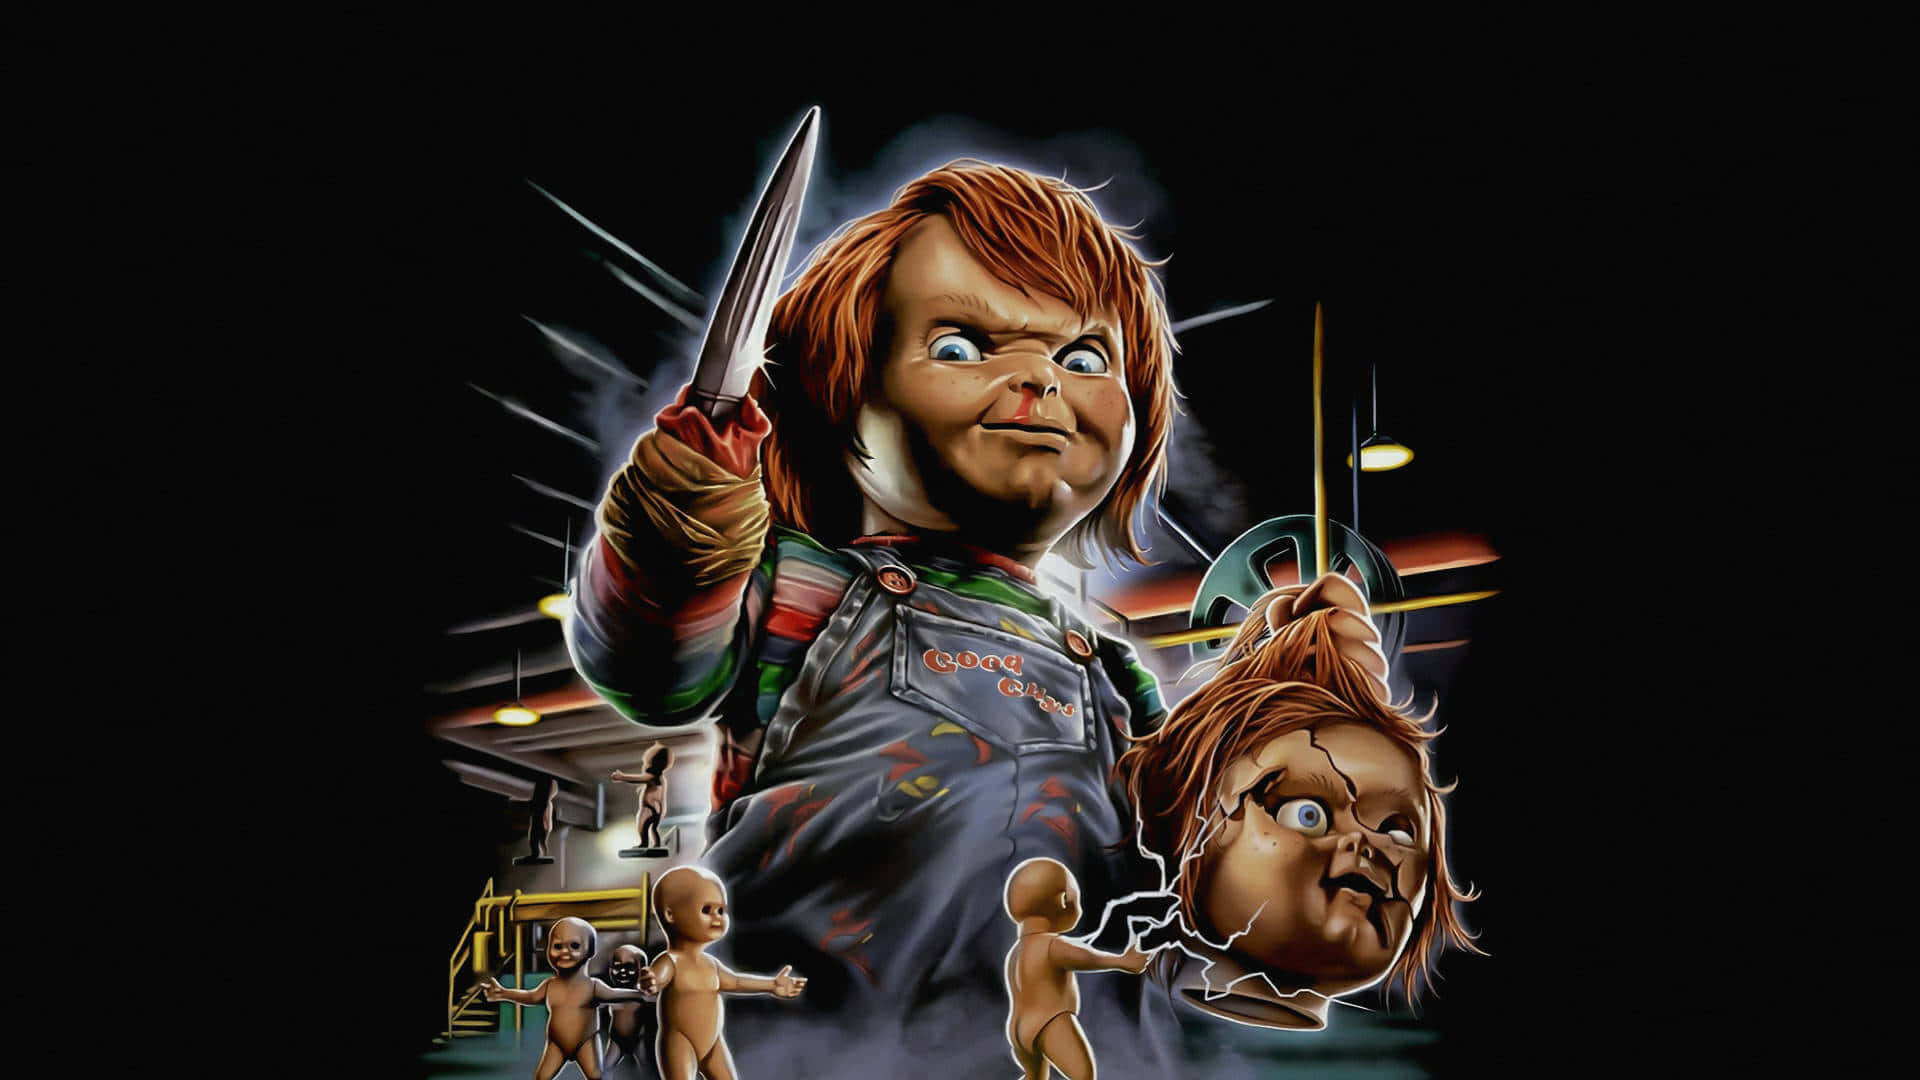 "No one's safest when Chucky is nearby"